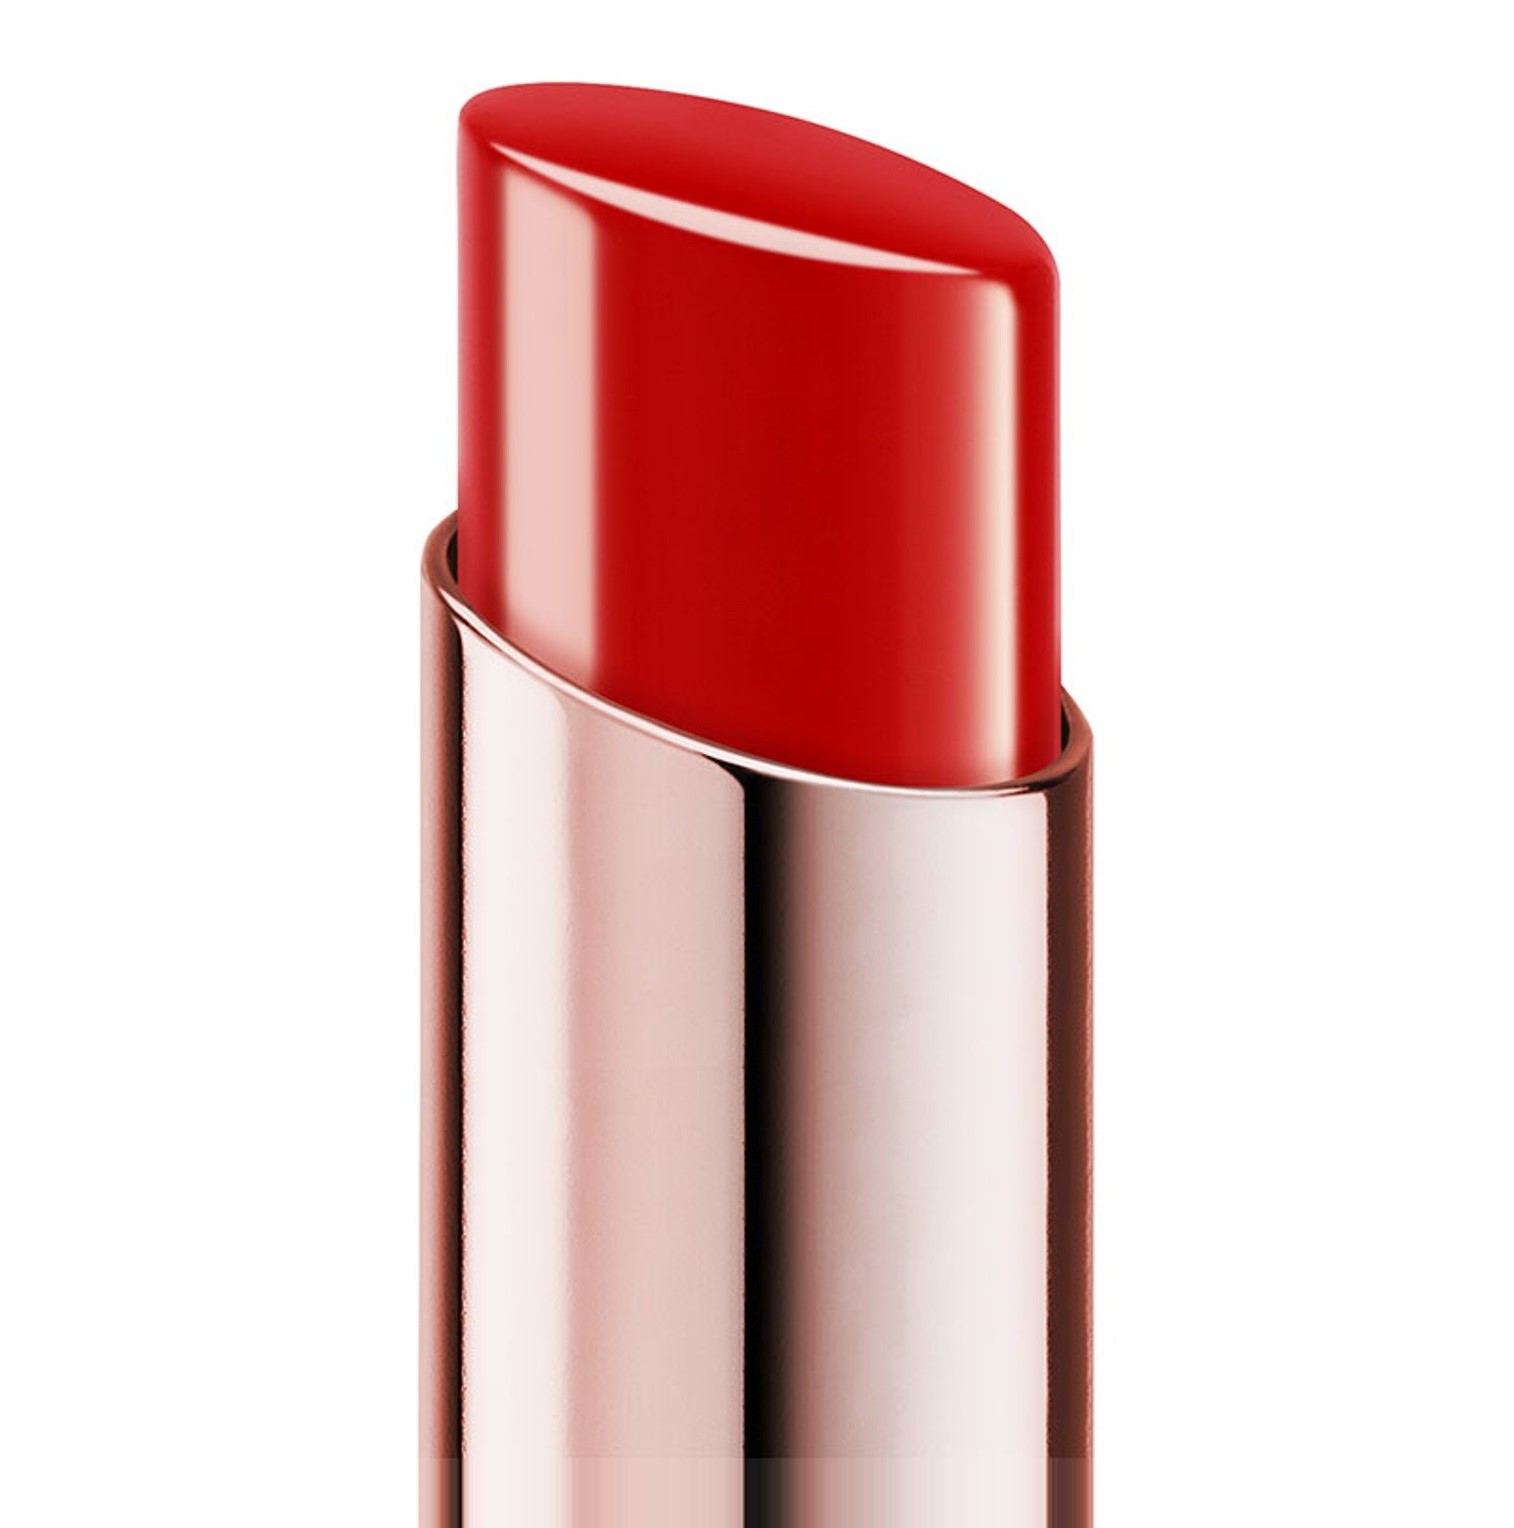 SON LANCOME L ABSOLU MADEMOISELLE SHINE BALMY FEEL LIPSTICK 157 MADEMOISELLE STANDS OUT MÀU ĐỎ 7